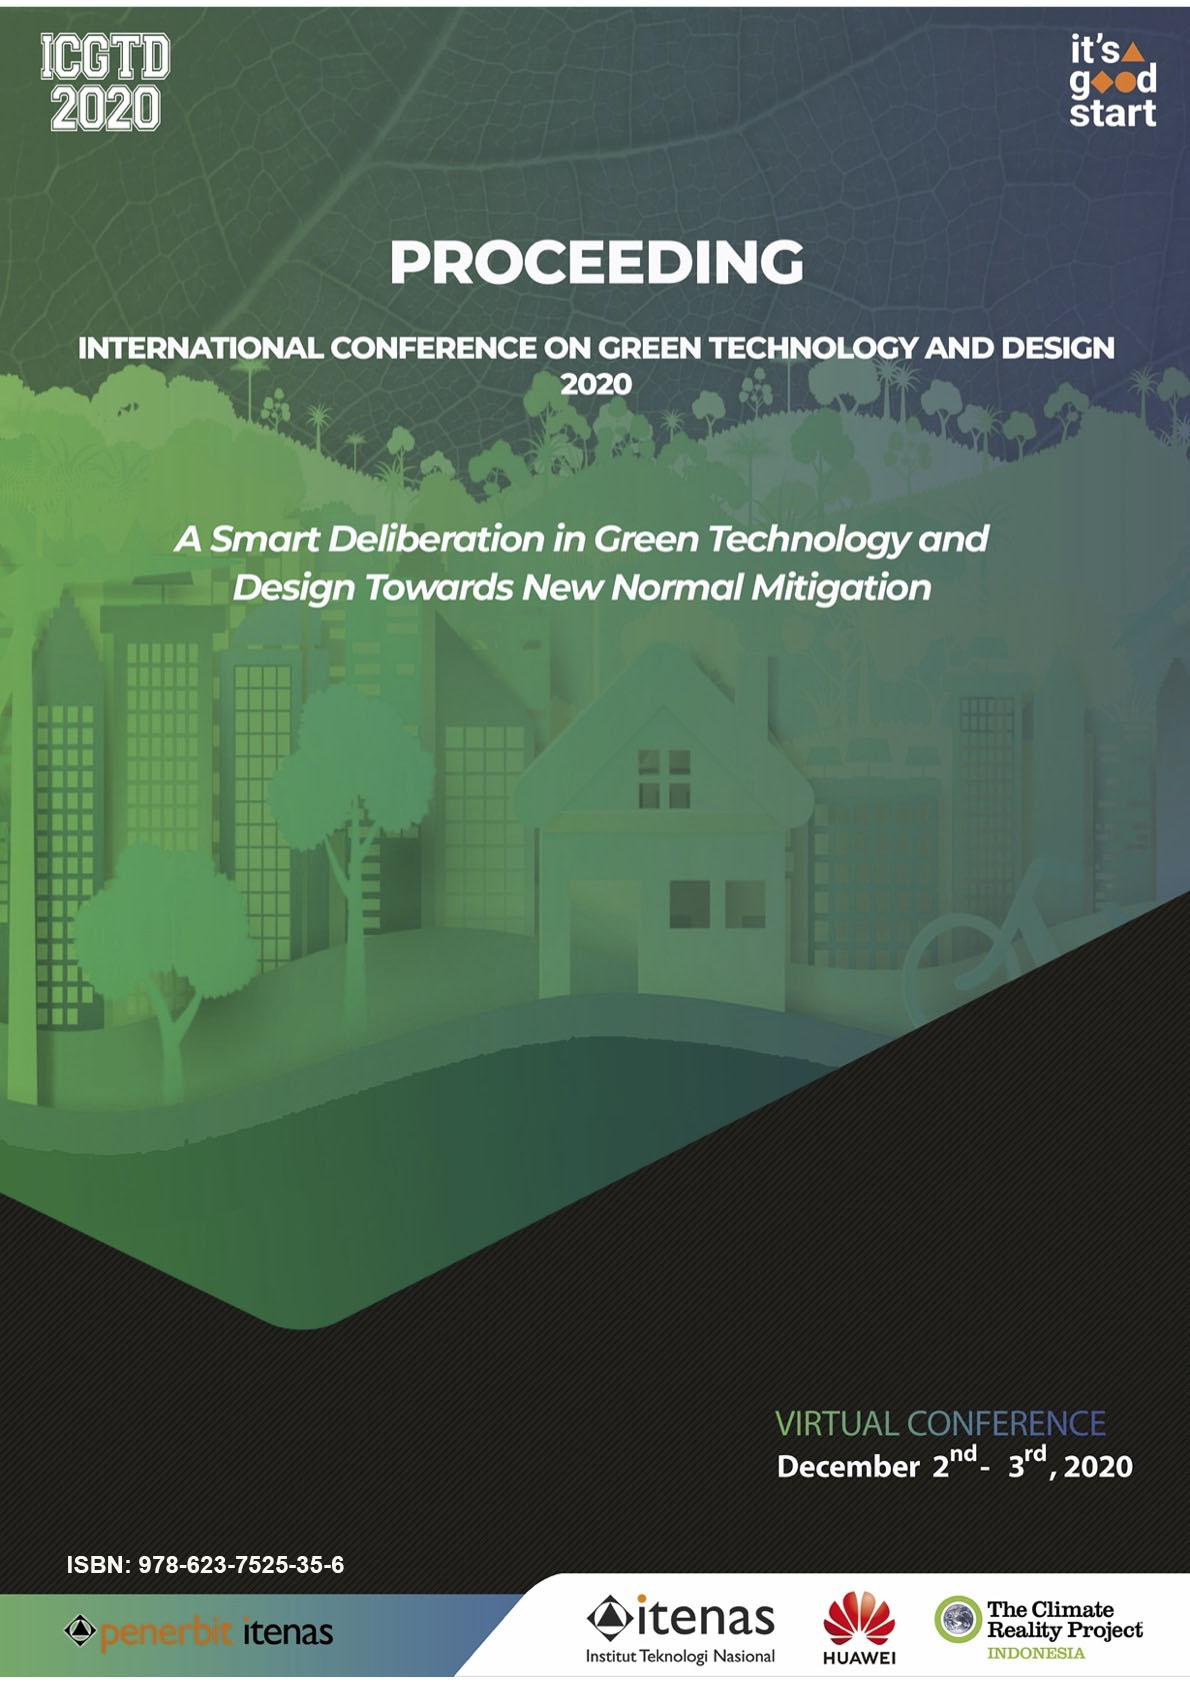 					View Vol. 2020: INTERNATIONAL CONFERENCE ON GREEN TECHNOLOGY AND DESIGN (ICGTD)
				